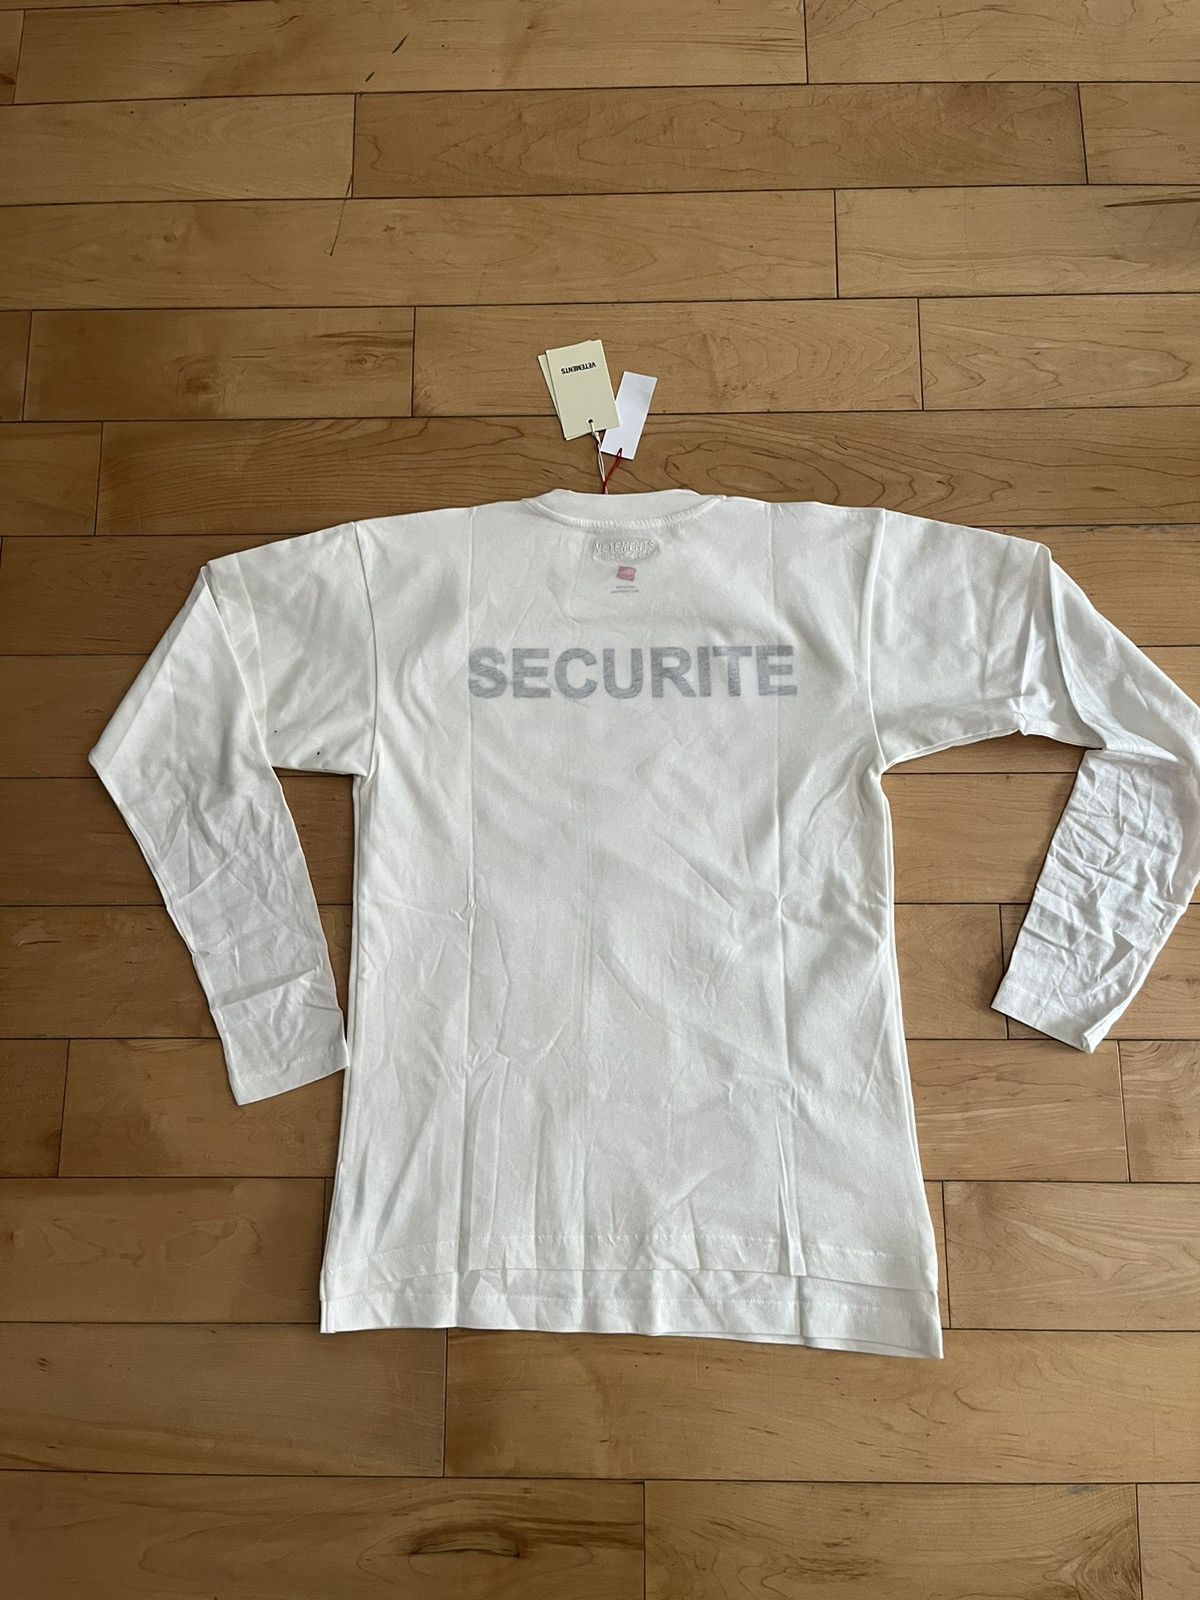 NWT - Vetements X Hanes double layer Security T-shirt - 2